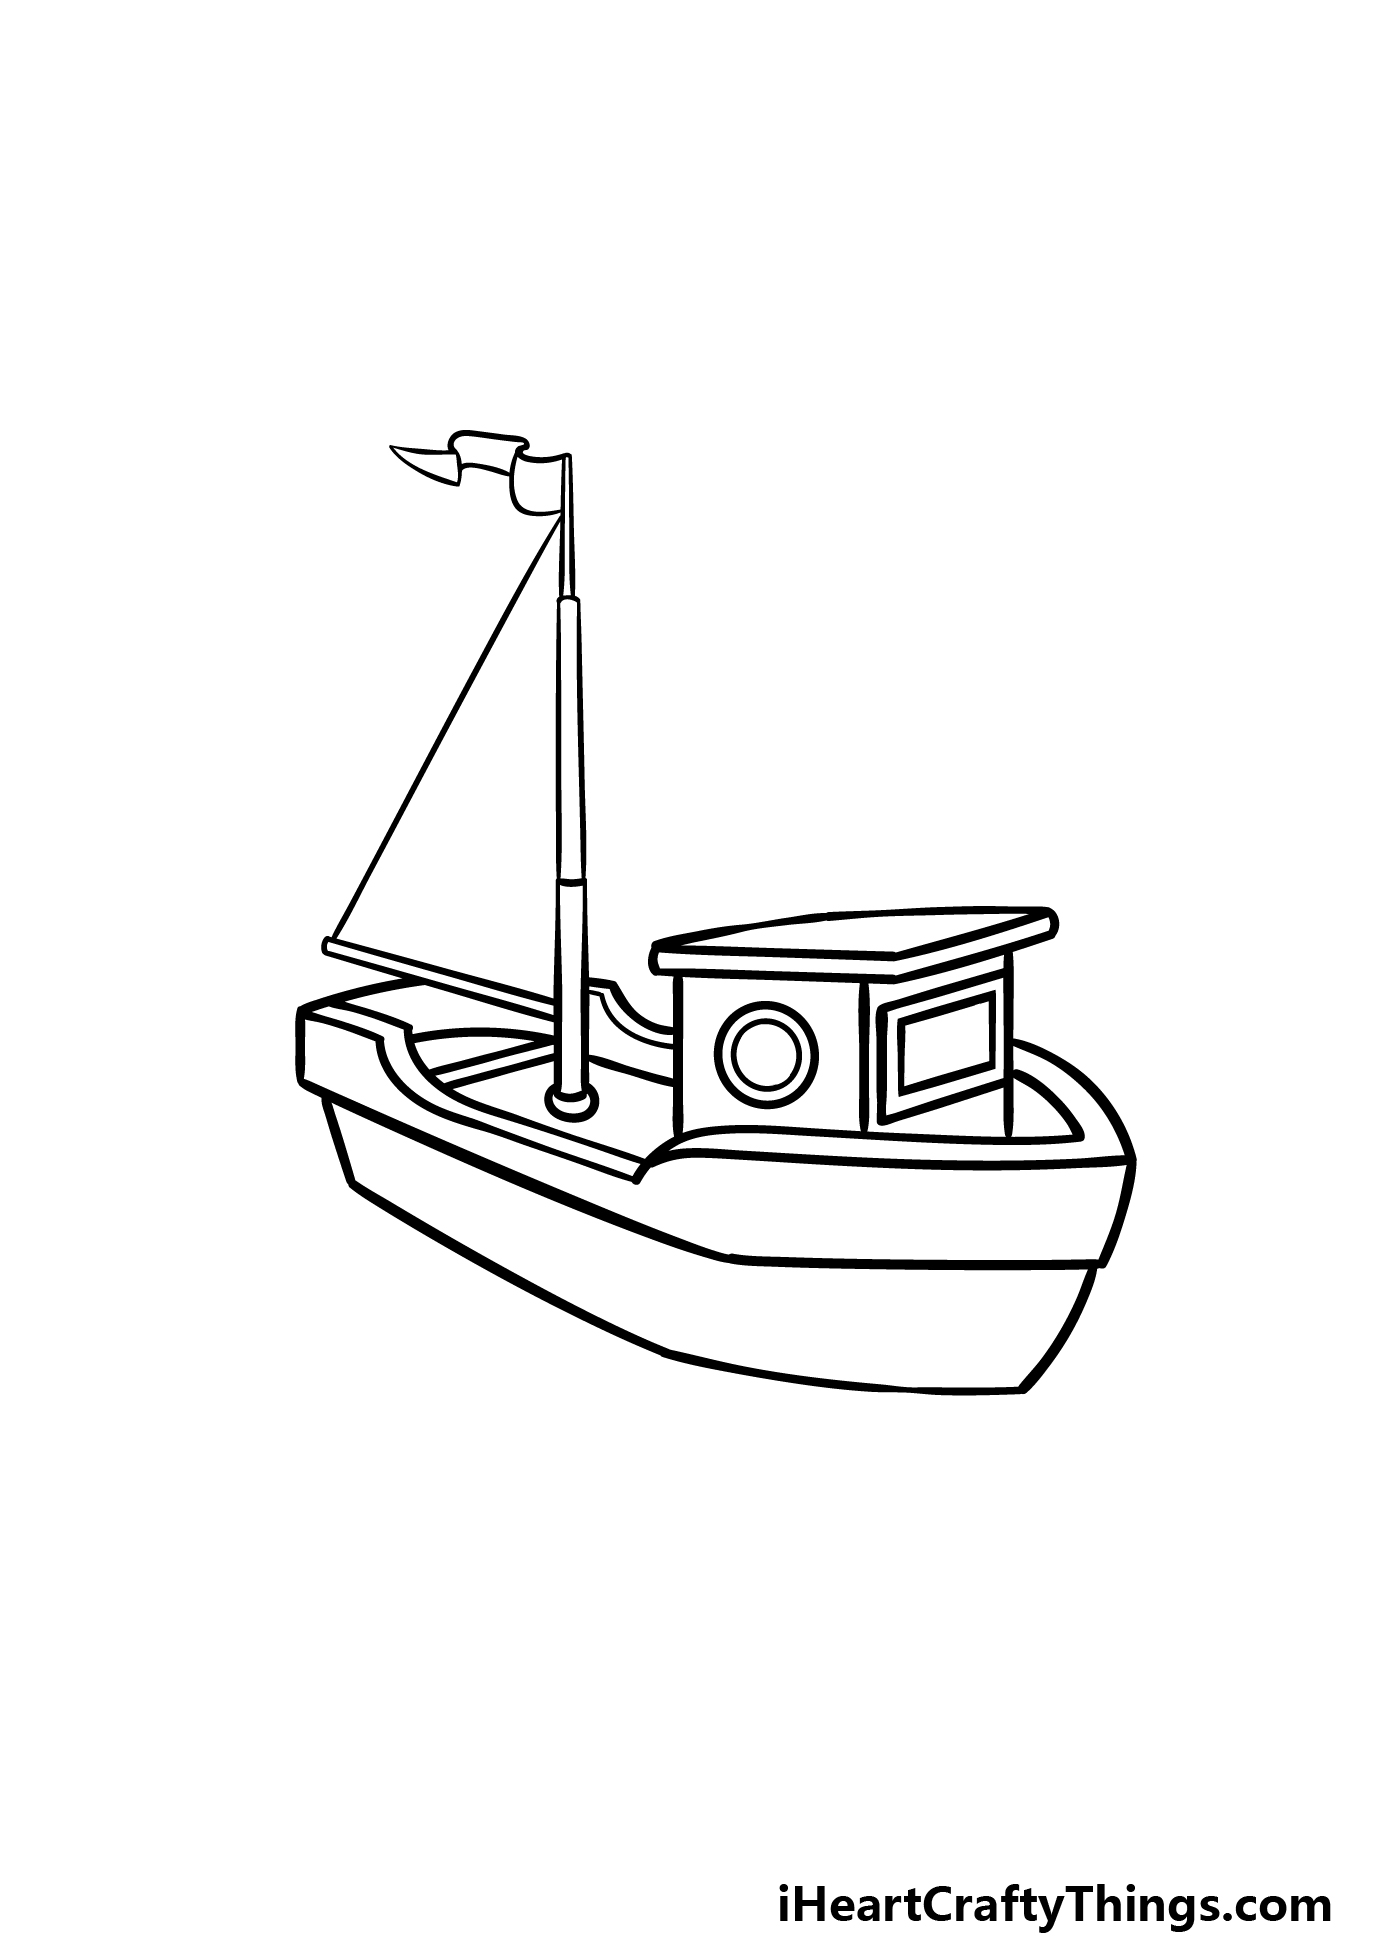 Cartoon Boat Drawing - How To Draw A Cartoon Boat Step By Step